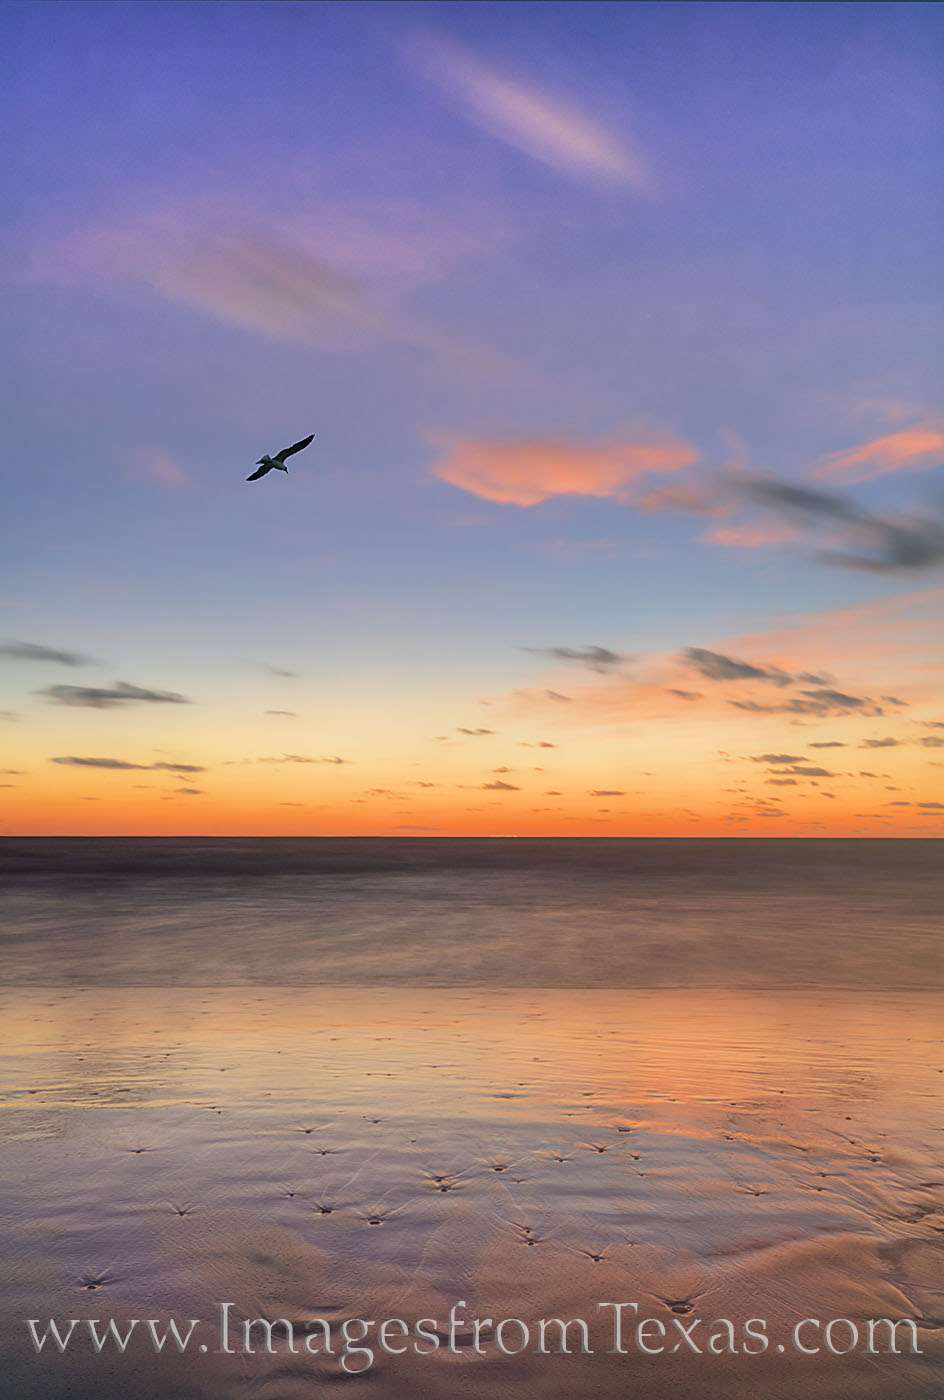 On a beautiful morning from South Padre Island, seagulls drifted overhead in the morning breeze. This image is a composite, as...